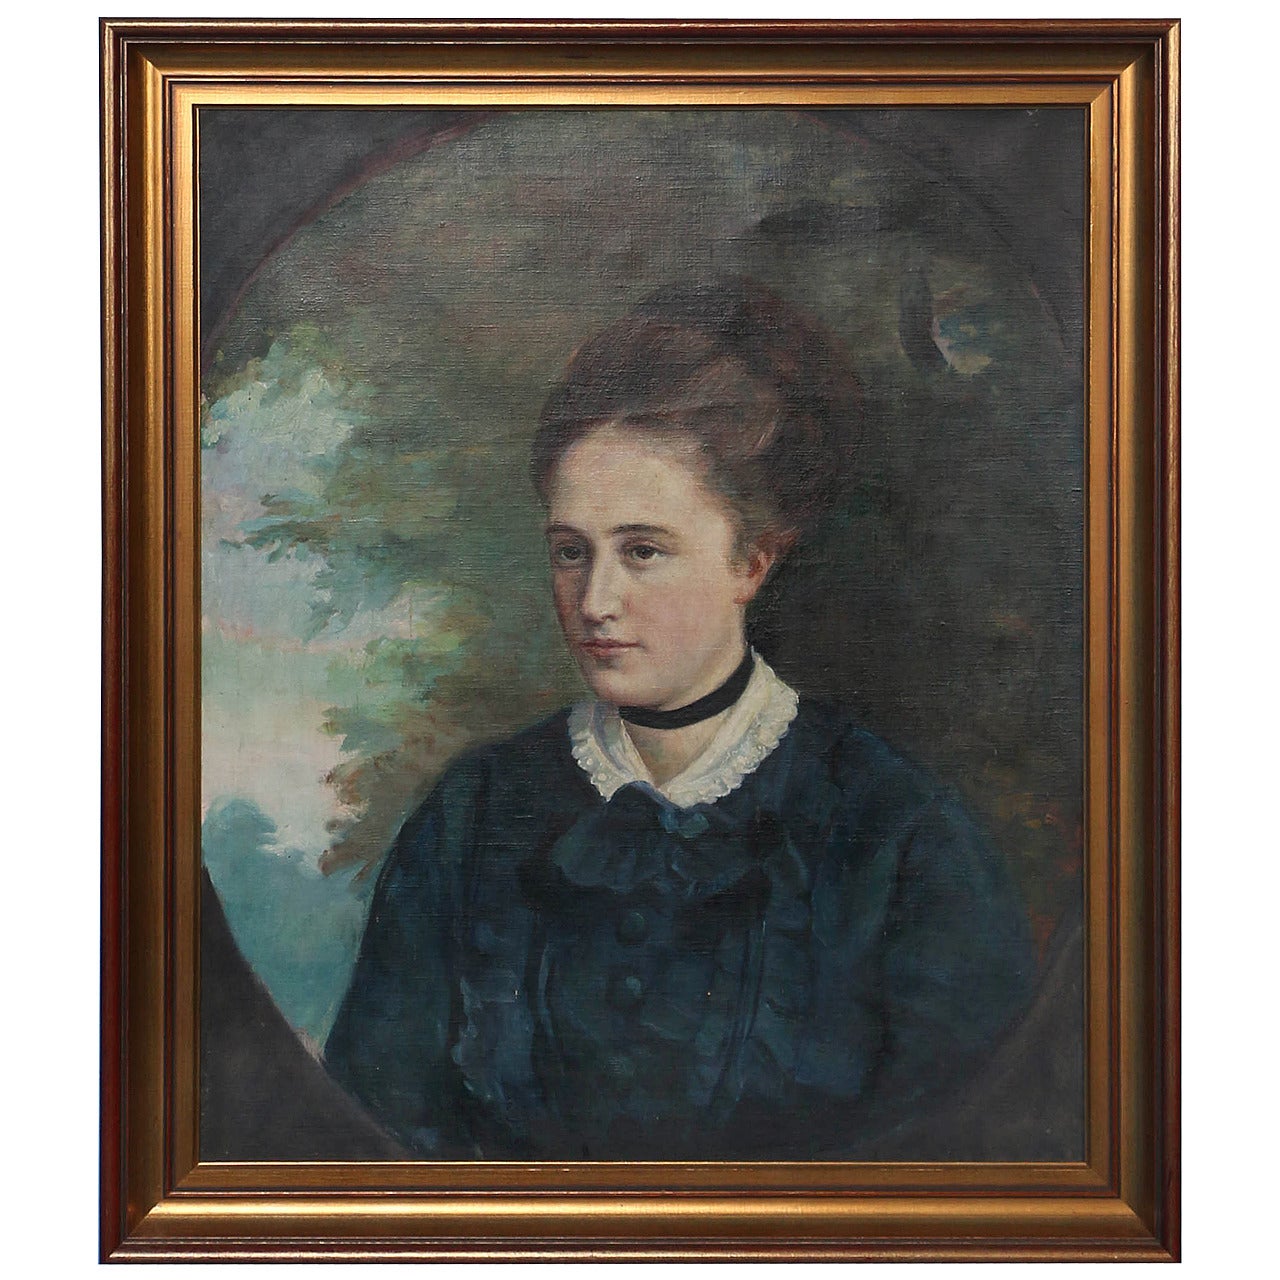 Original Oil on Canvas, Portrait of Young Woman, circa 1900s